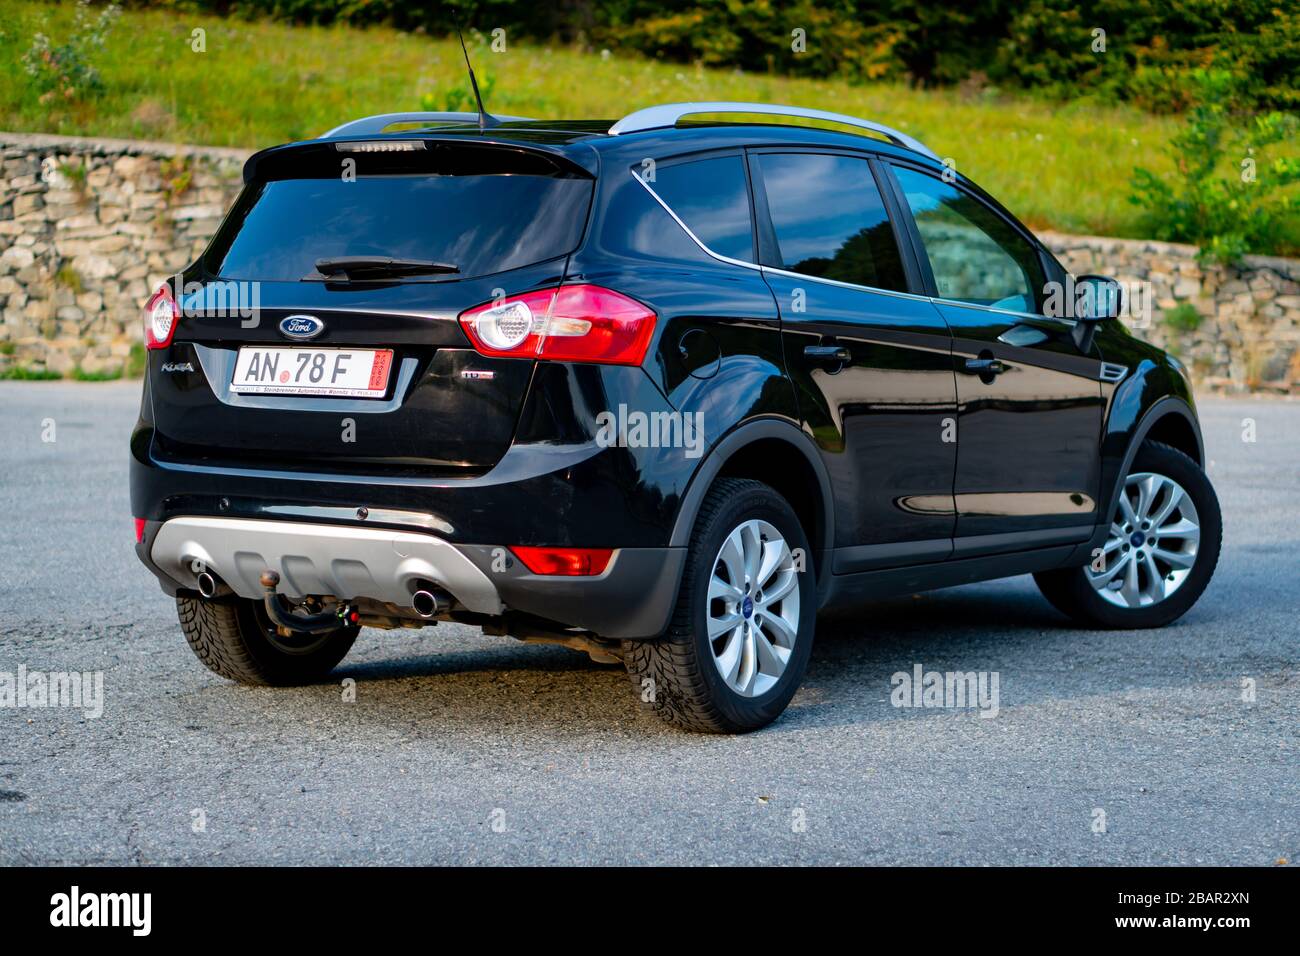 https://c8.alamy.com/comp/2BAR2XN/second-generation-ford-kuga-suv-black-metallic-color-panoramic-ceiling-4x4-traction-automatic-transmission-isolated-in-an-empty-parking-lot-2BAR2XN.jpg